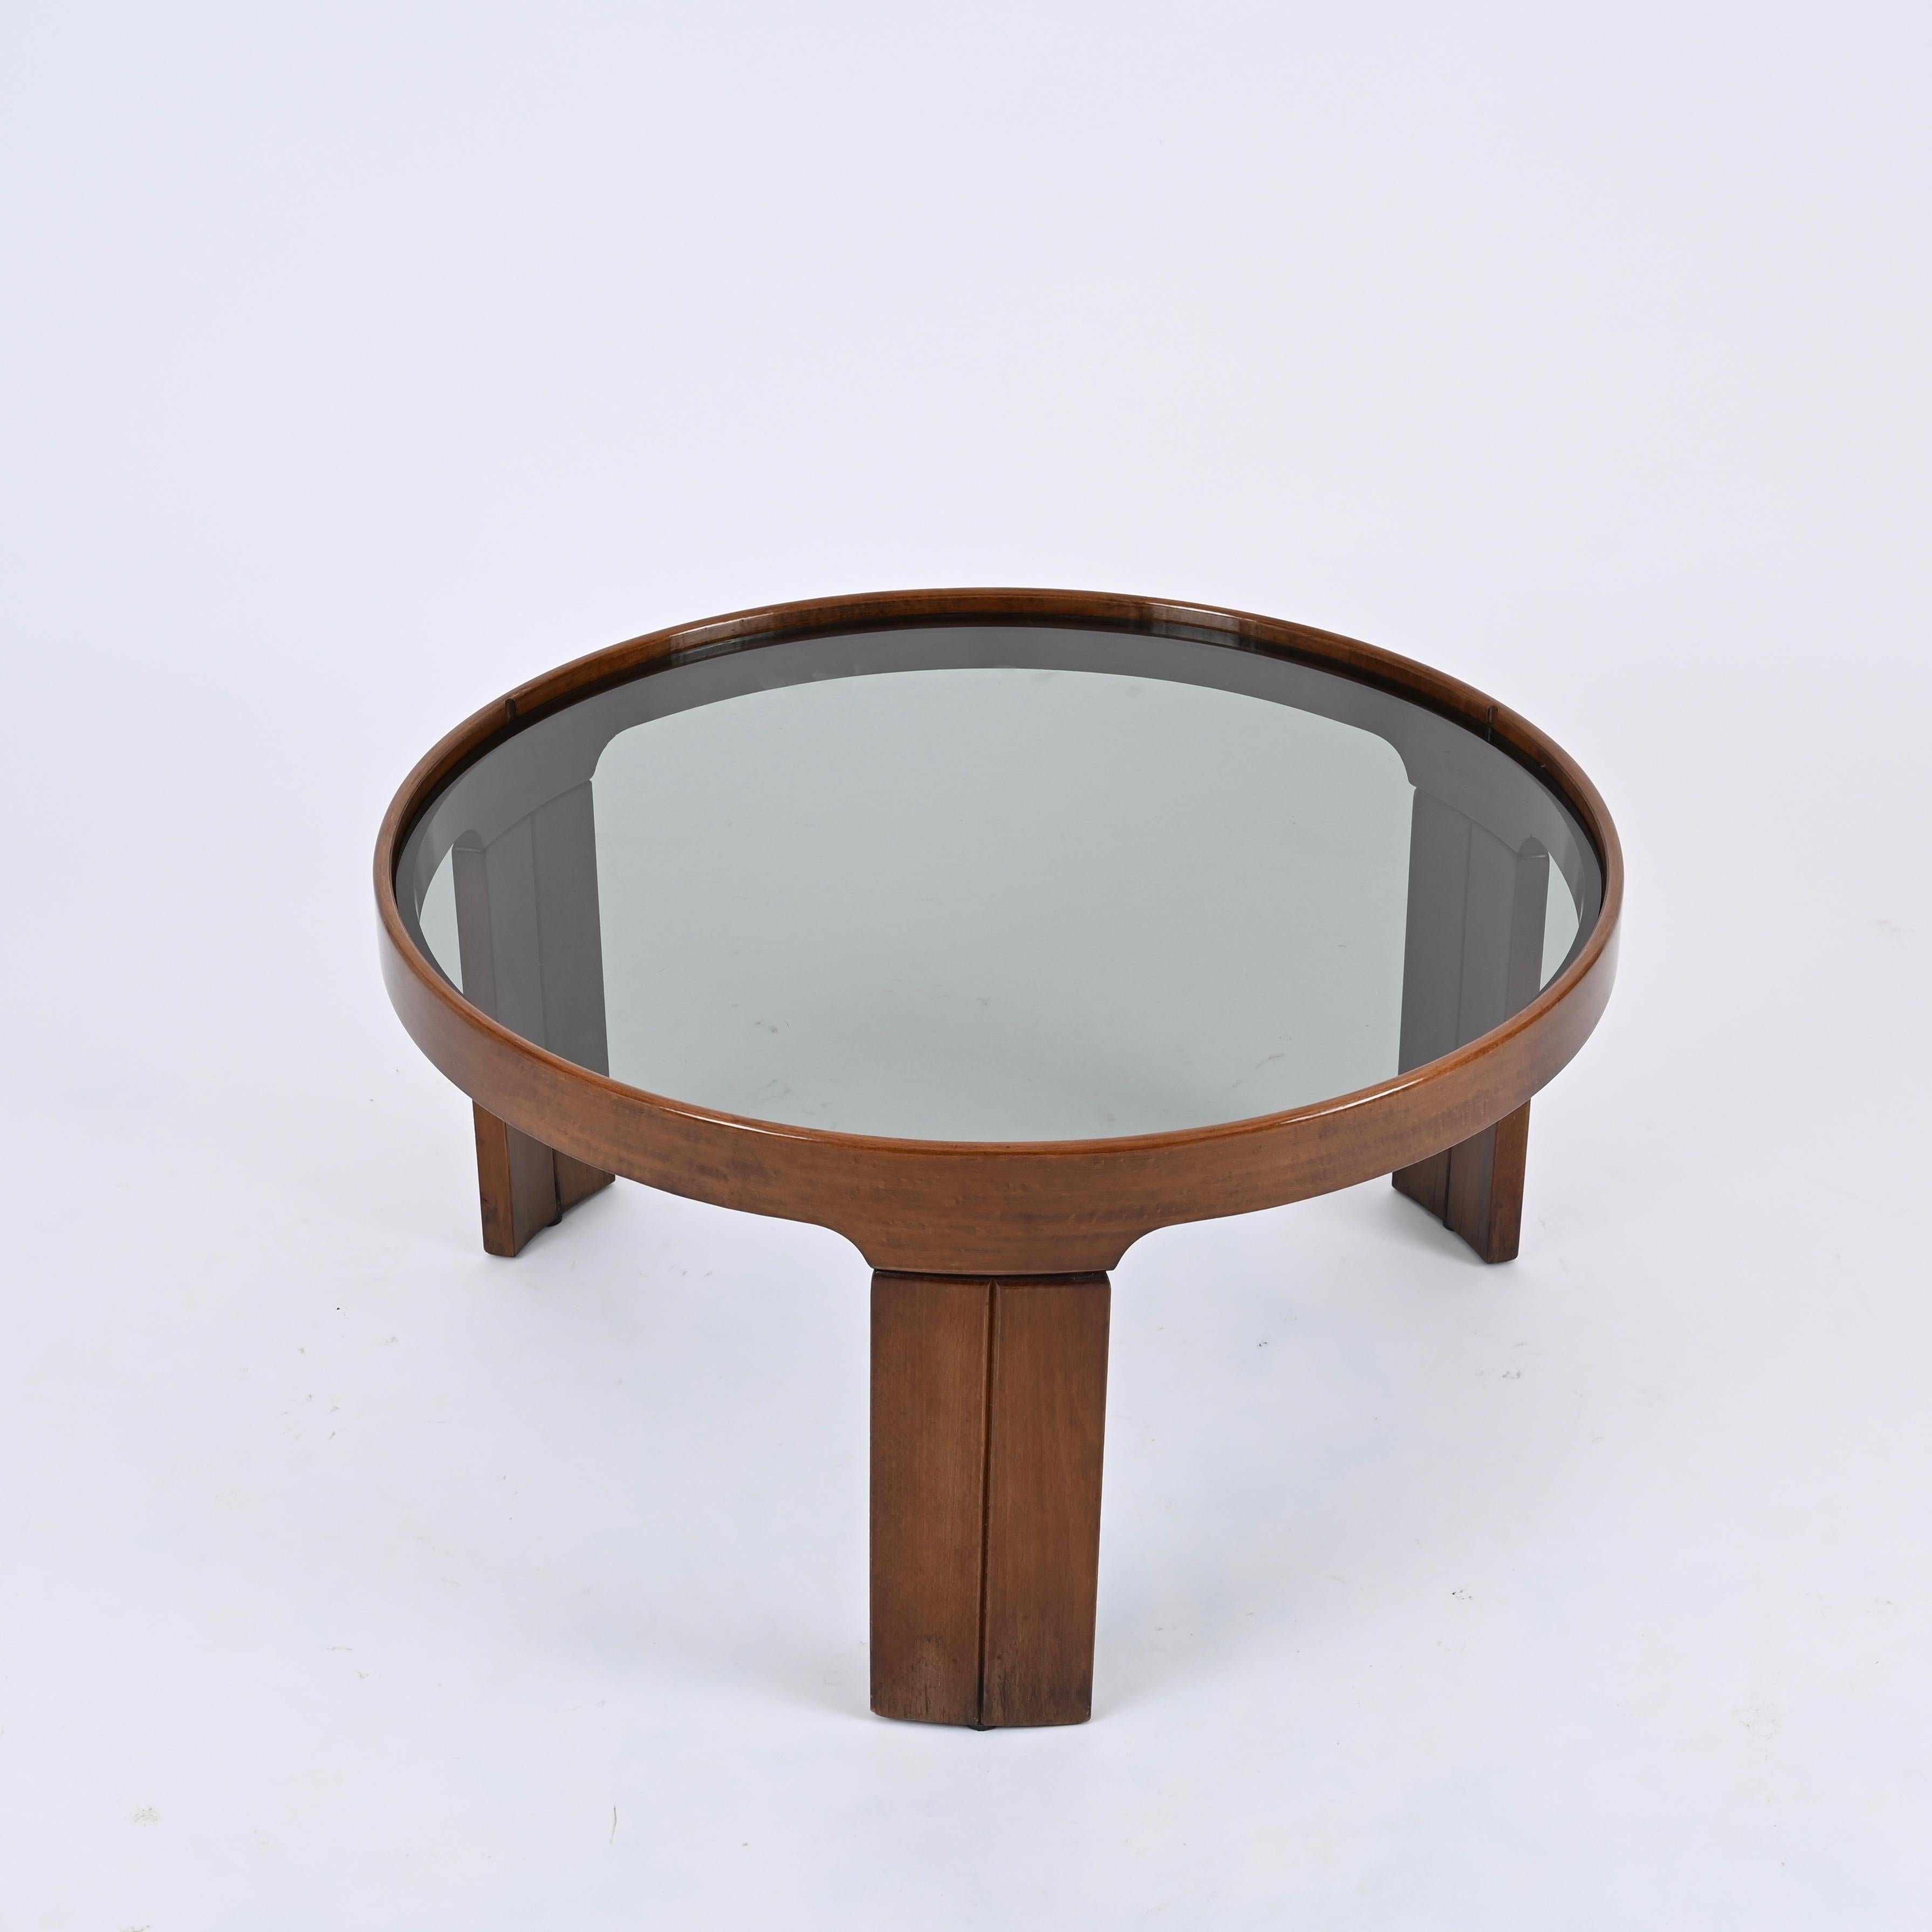 Mid-20th Century Molteni Walnut Round Coffee or Side Table With Smoked Glass, Italy 1960s